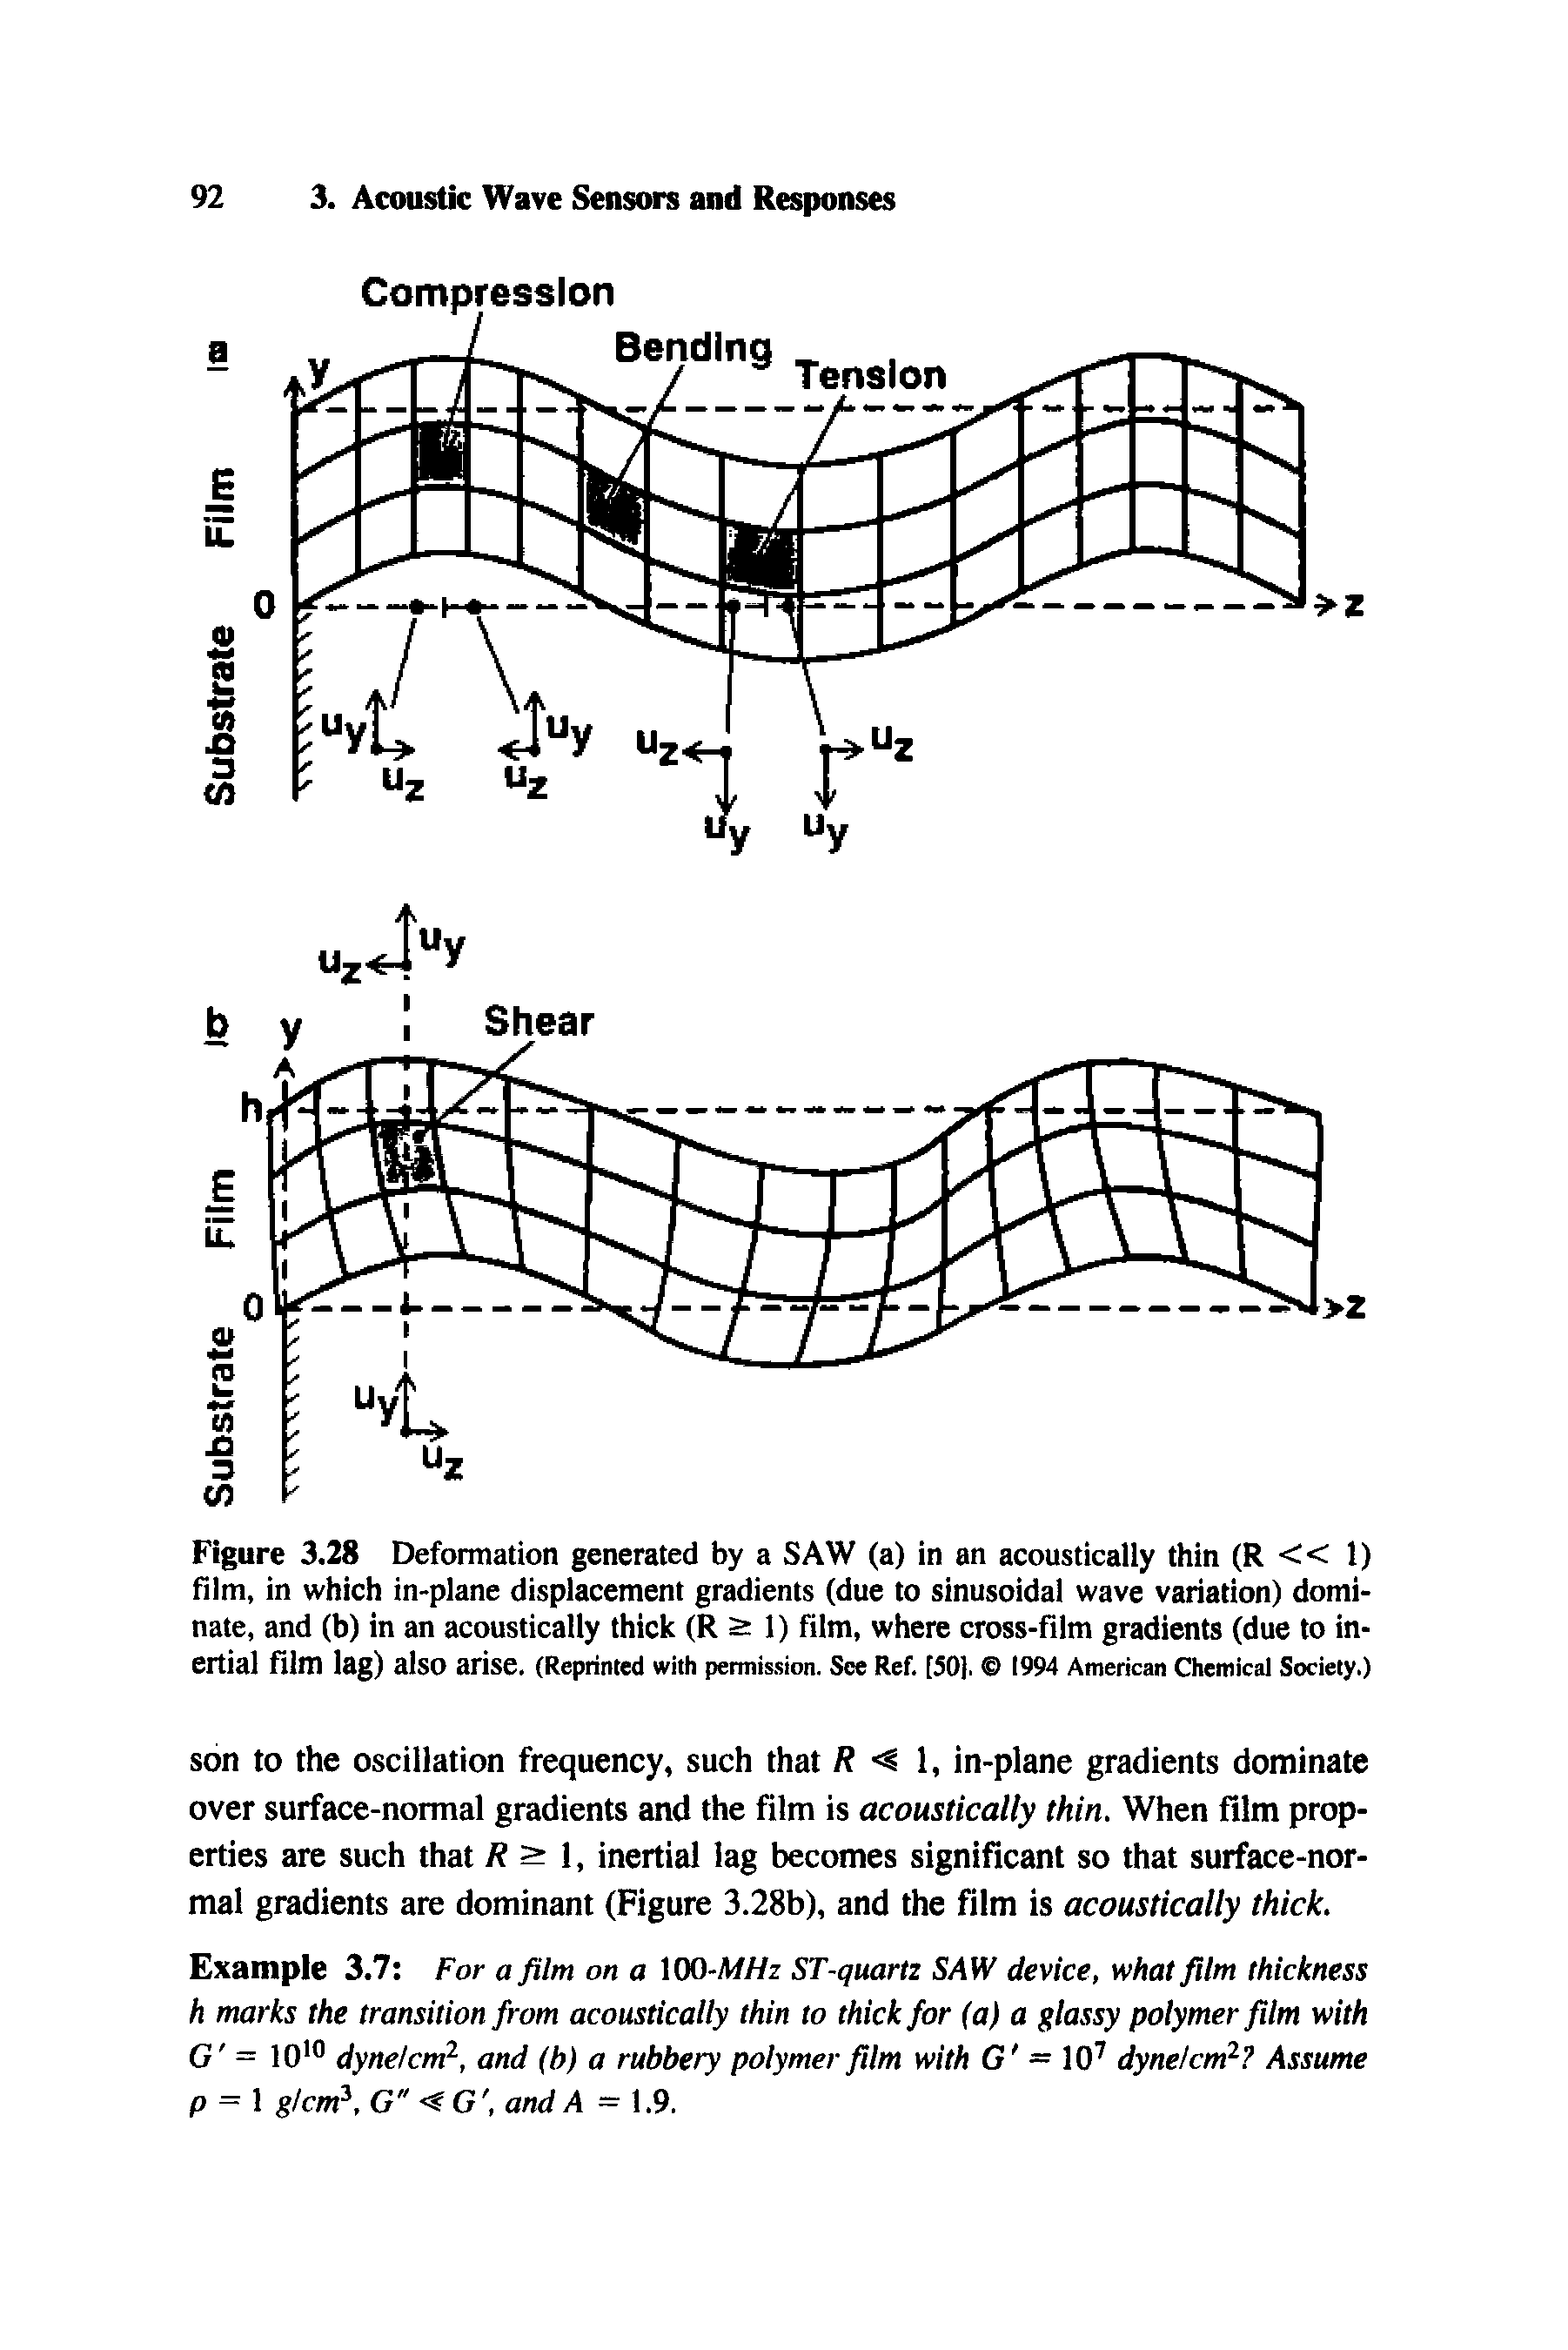 Figure 3.28 Deformation generated by a SAW (a) in an acoustically thin (R << 1) film, in which in-plane displacement gradients (due to sinusoidal wave variation) dominate, and (b) in an acoustically thick (R 1) film, where cross-film gradients (due to inertial fllm lag) also arise. (Reprinted with permission. See Ref. [50]. O 1994 American CJiemical Society.)...